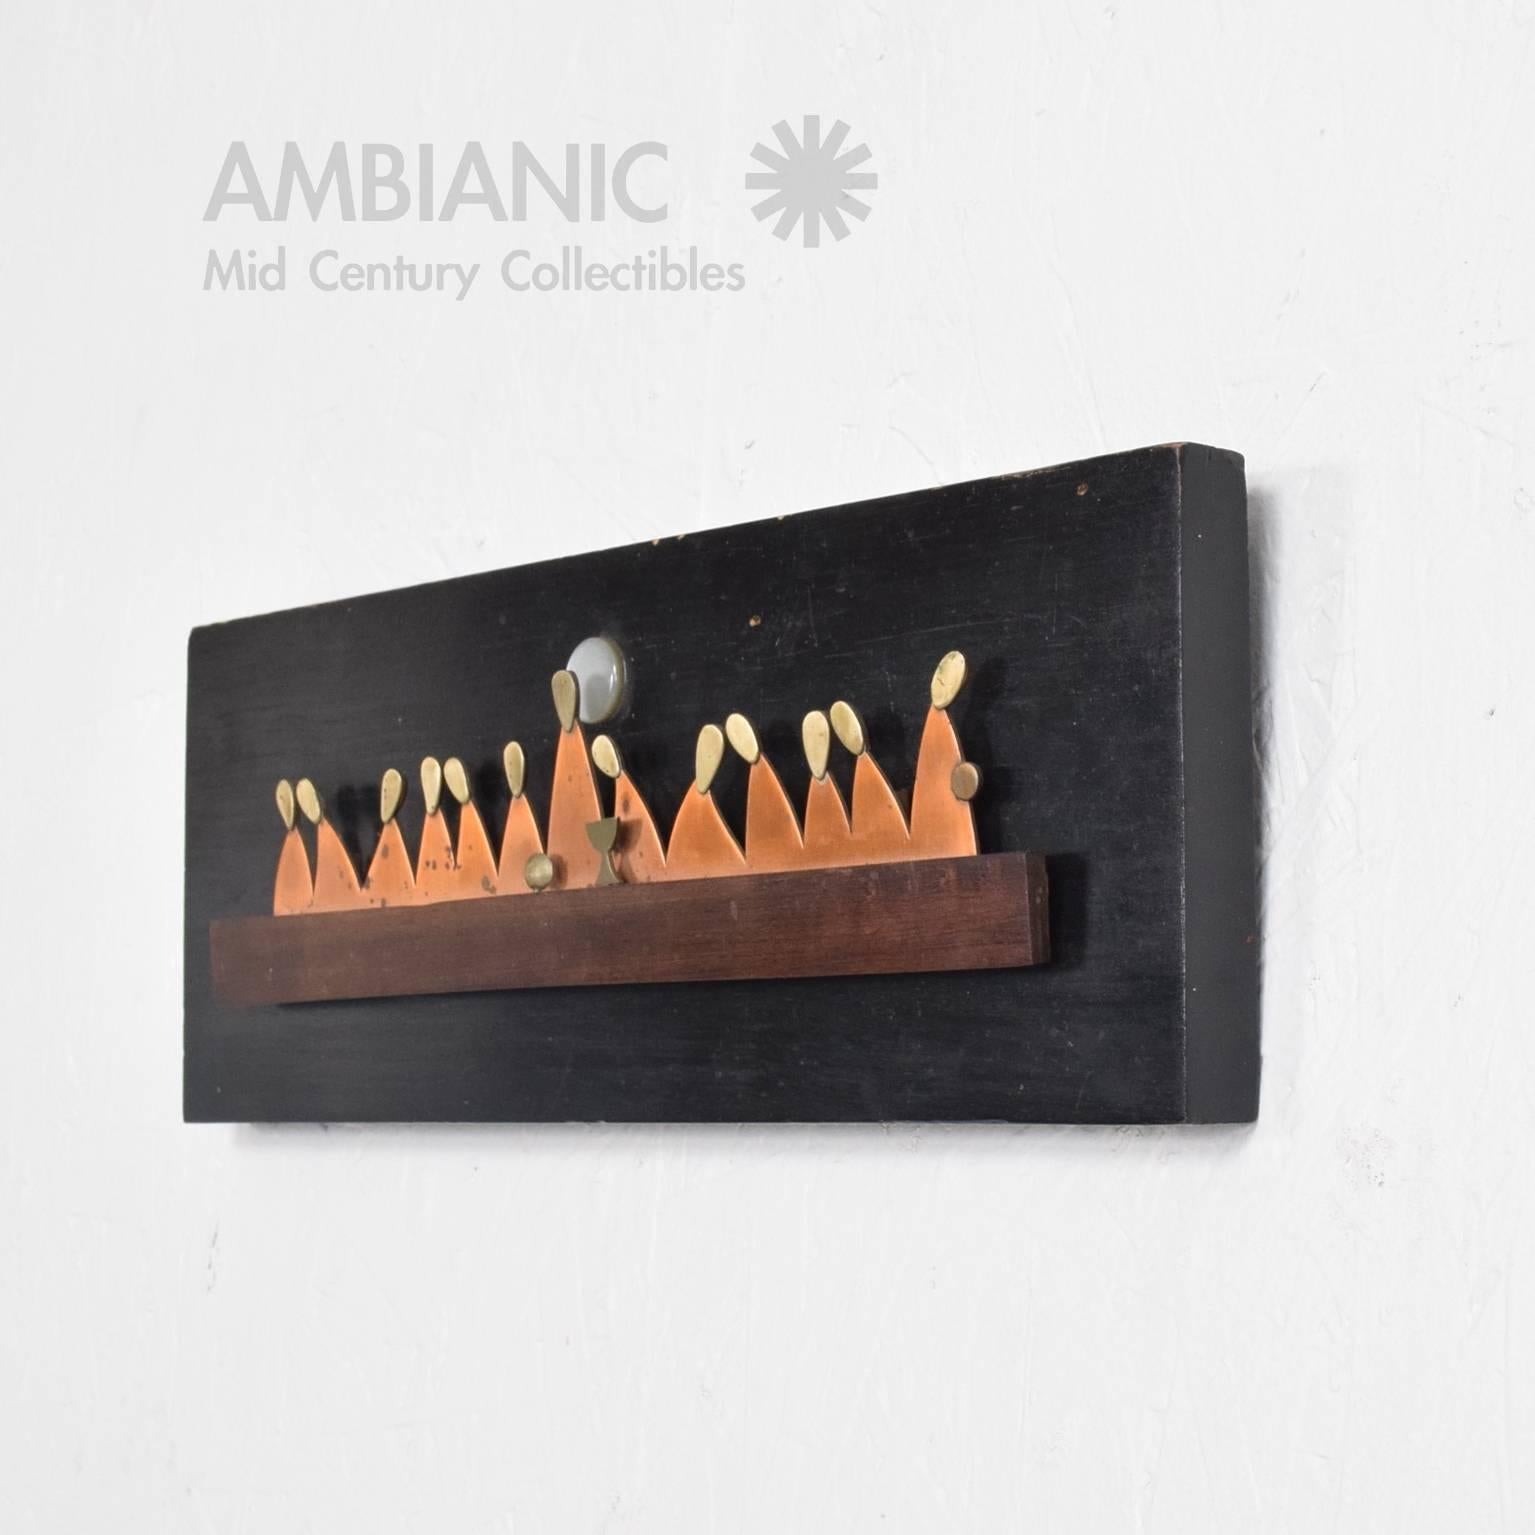 For your consideration a vintage last supper wall-mounted plaque/sculpture. Stamped in the back 